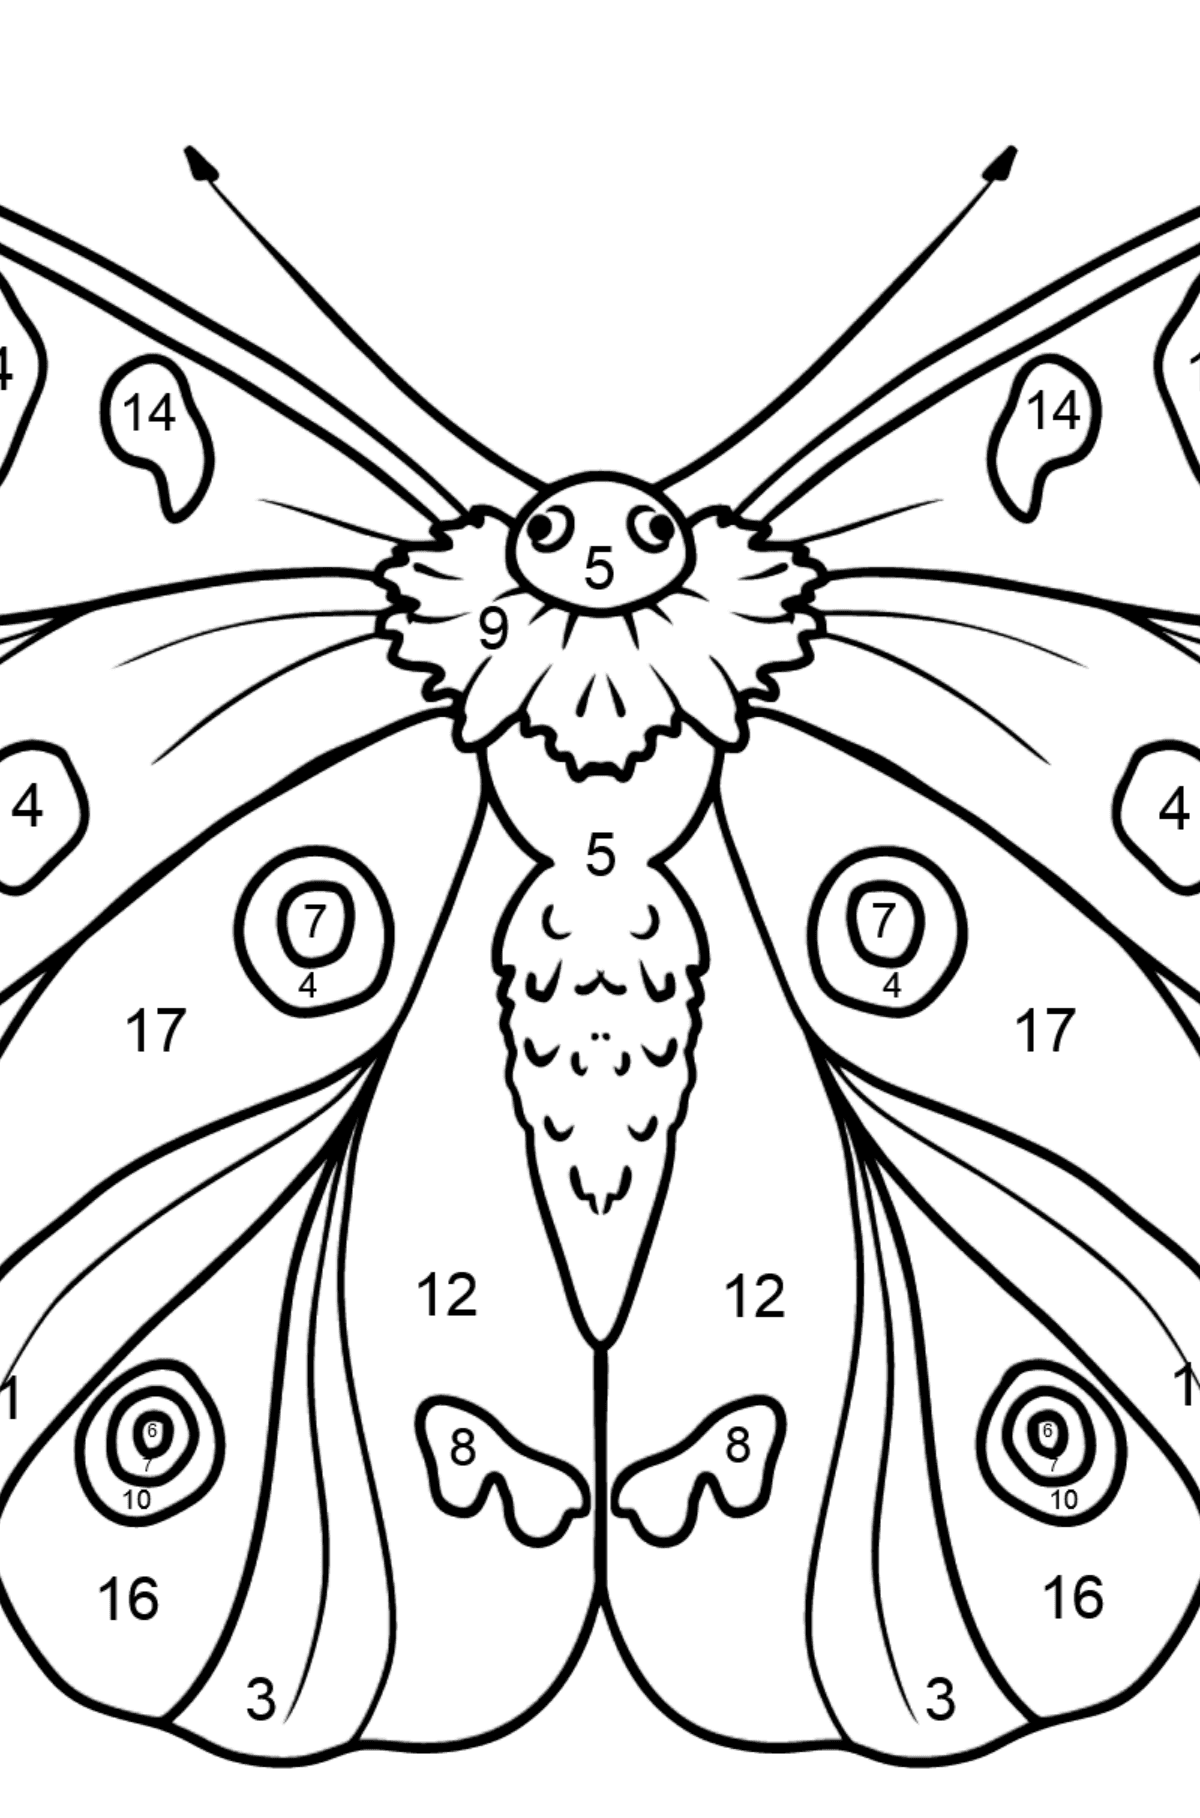 Apollo Butterfly coloring page - Coloring by Numbers for Kids